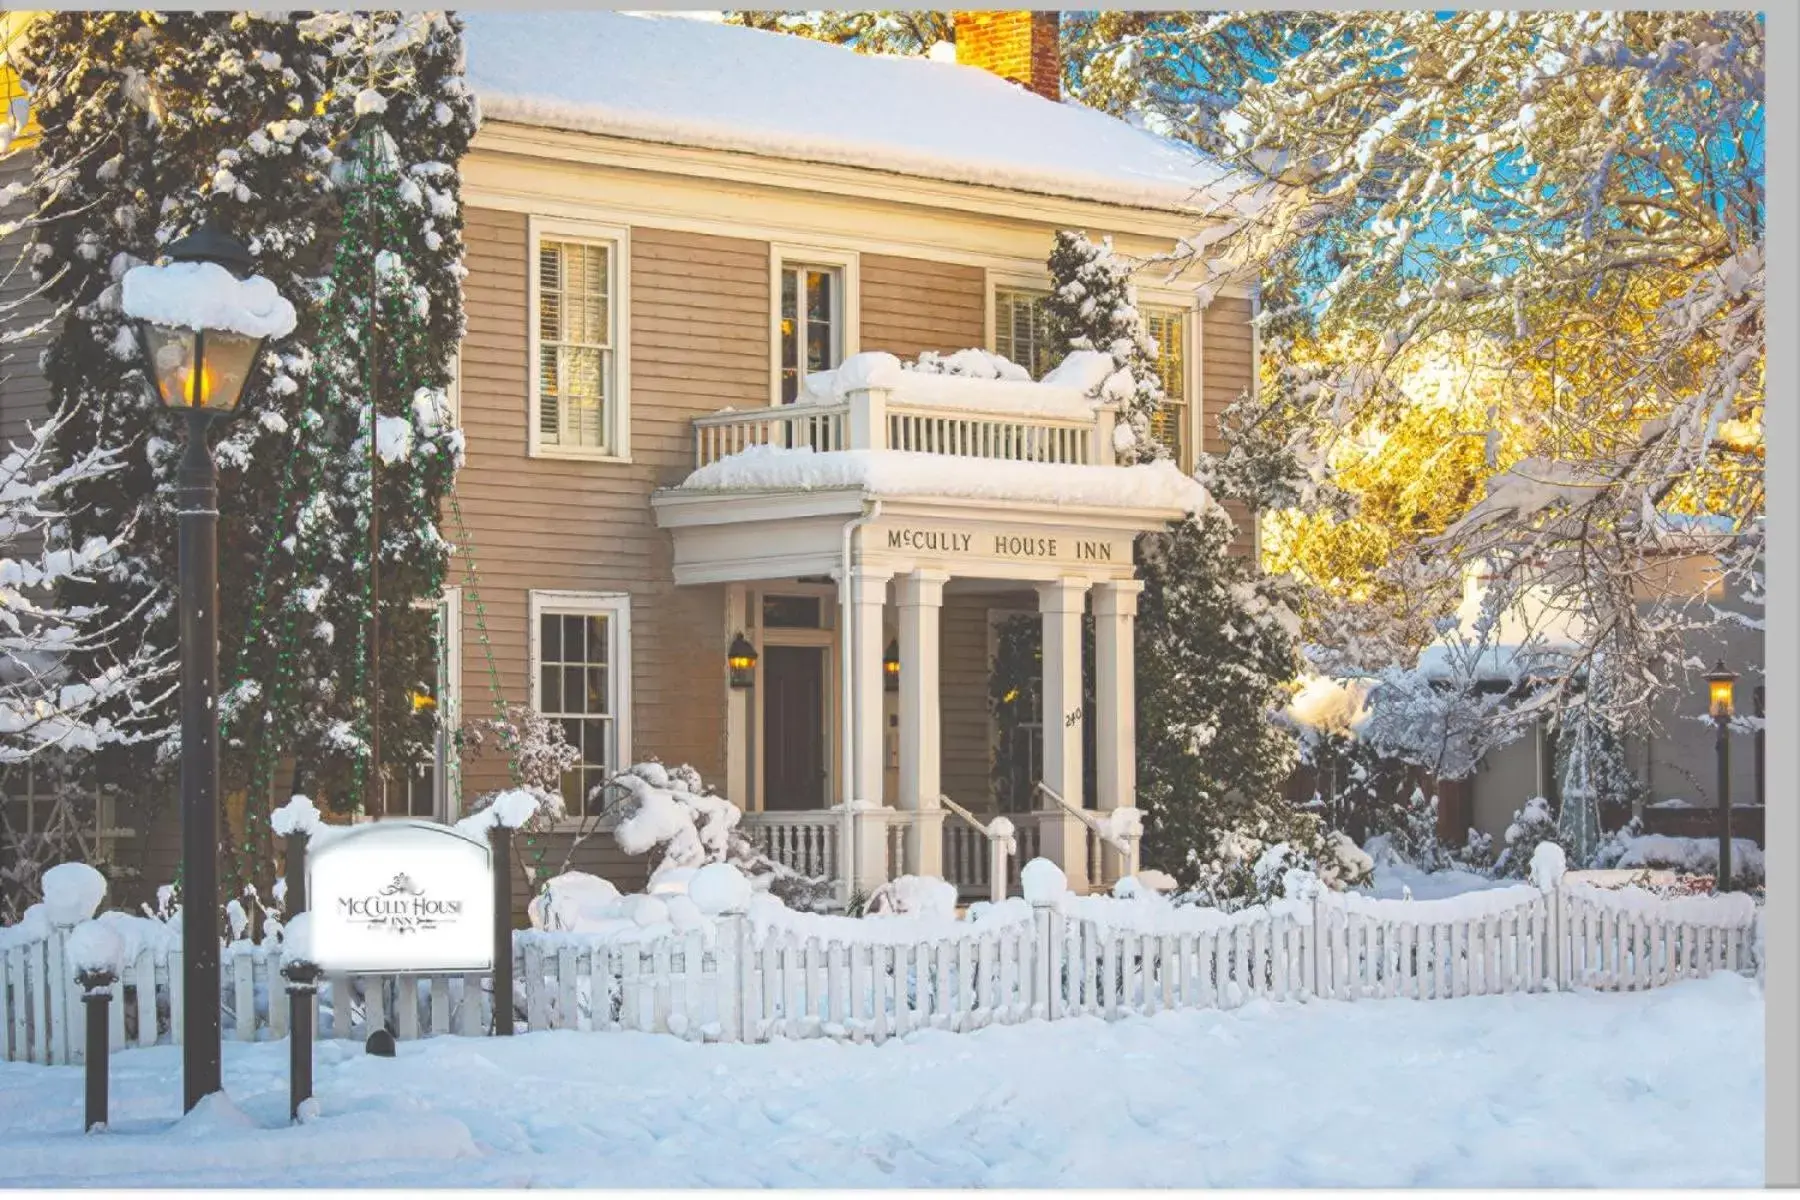 Property building, Winter in McCully House Inn